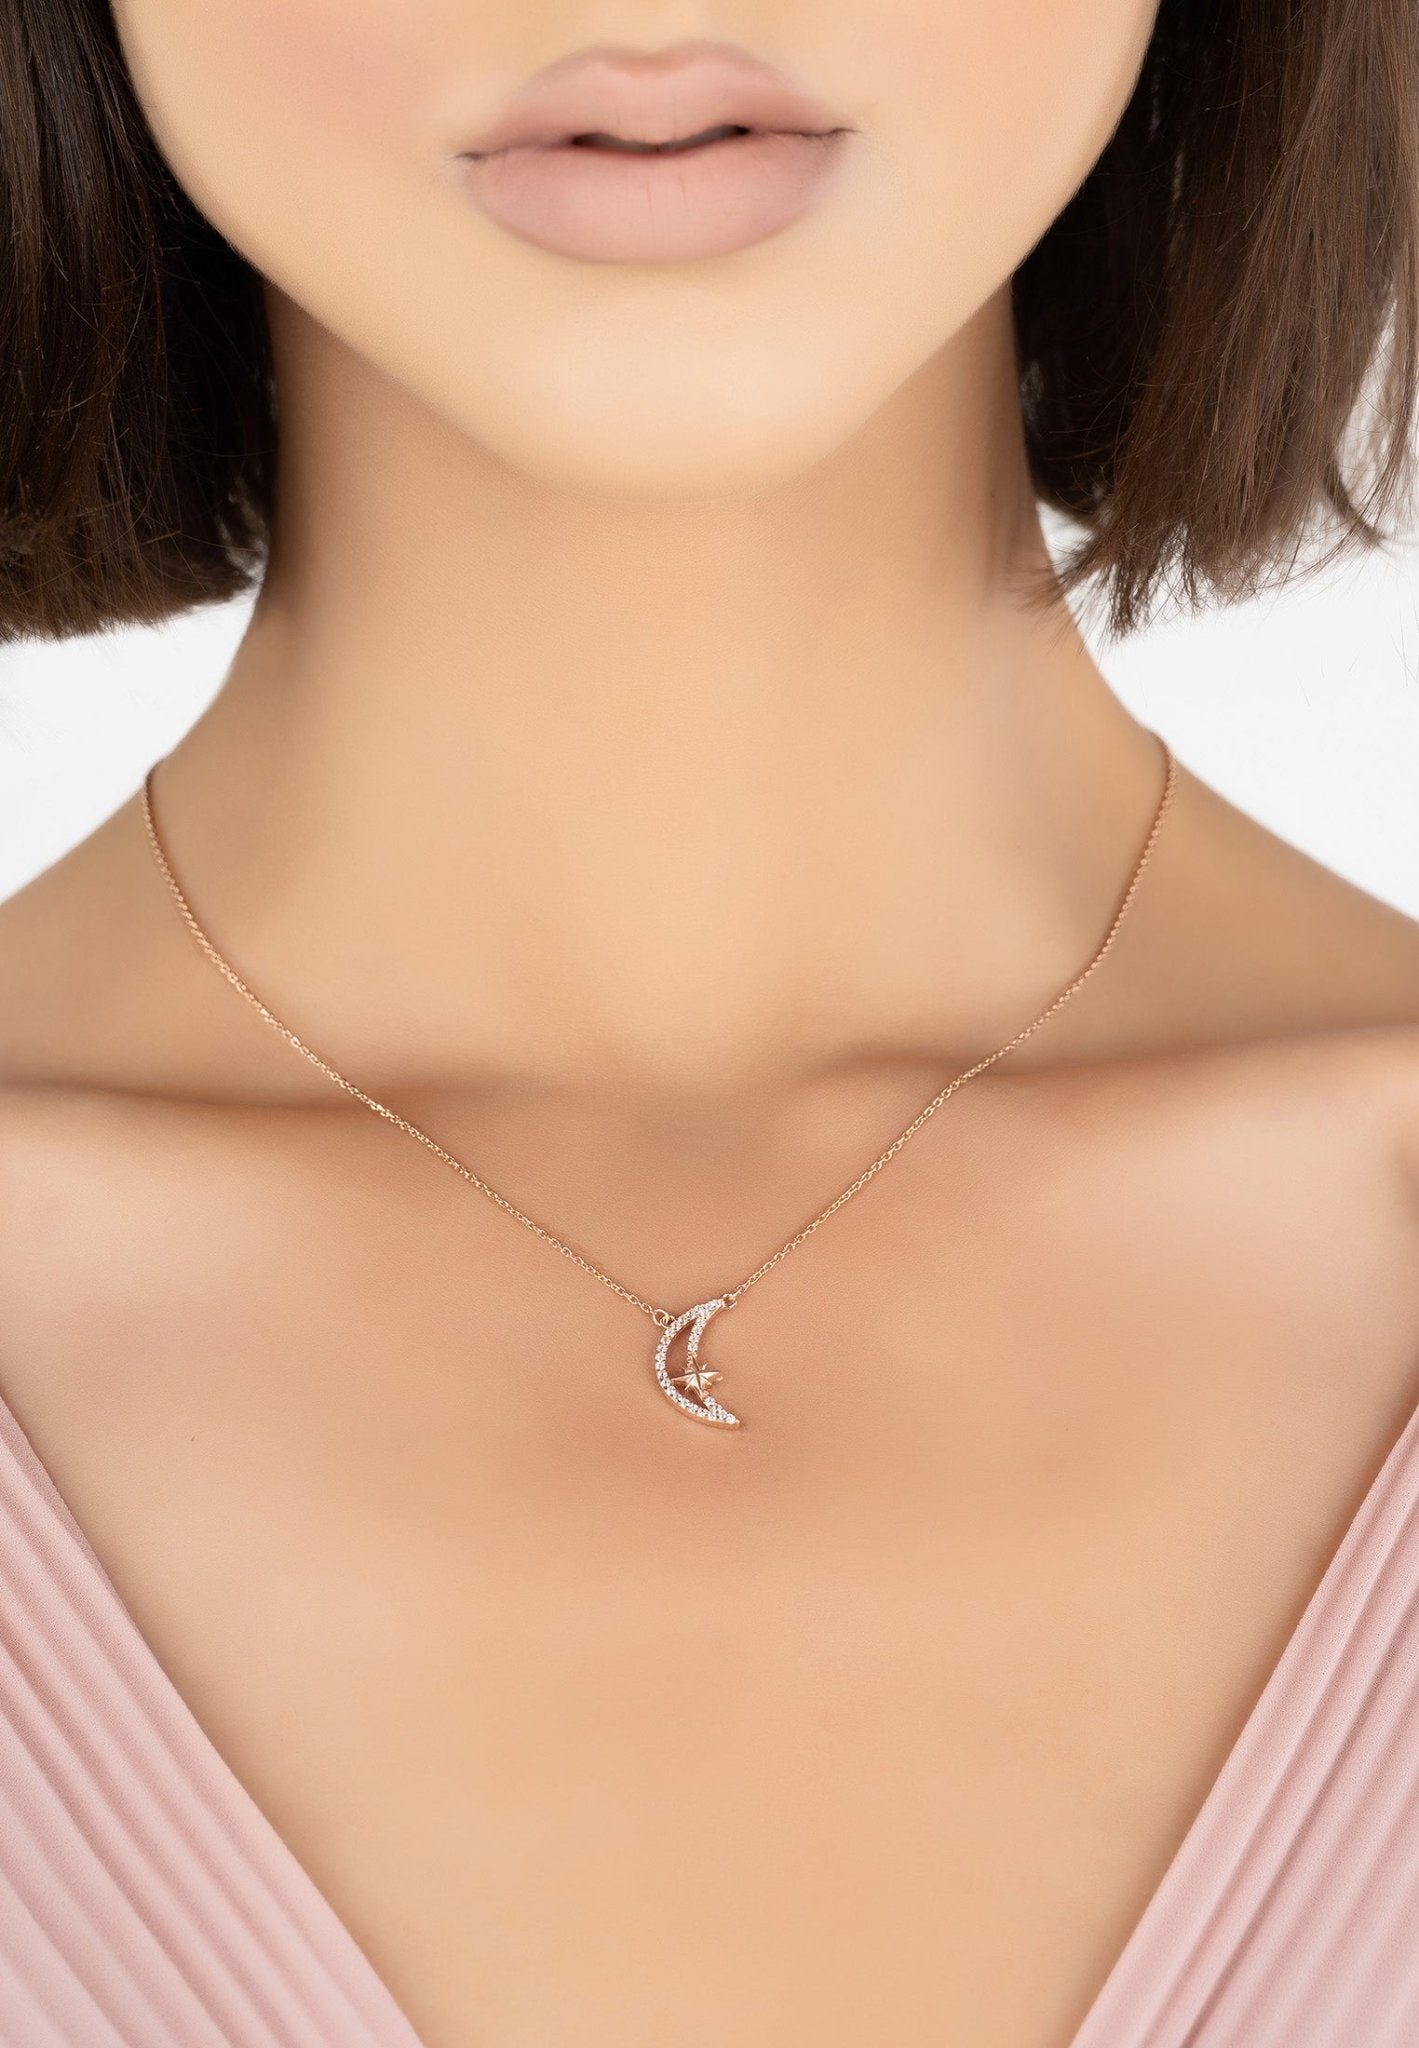 Sparkling Crescent Moon And Star Necklace Rosegold - LATELITA Necklaces